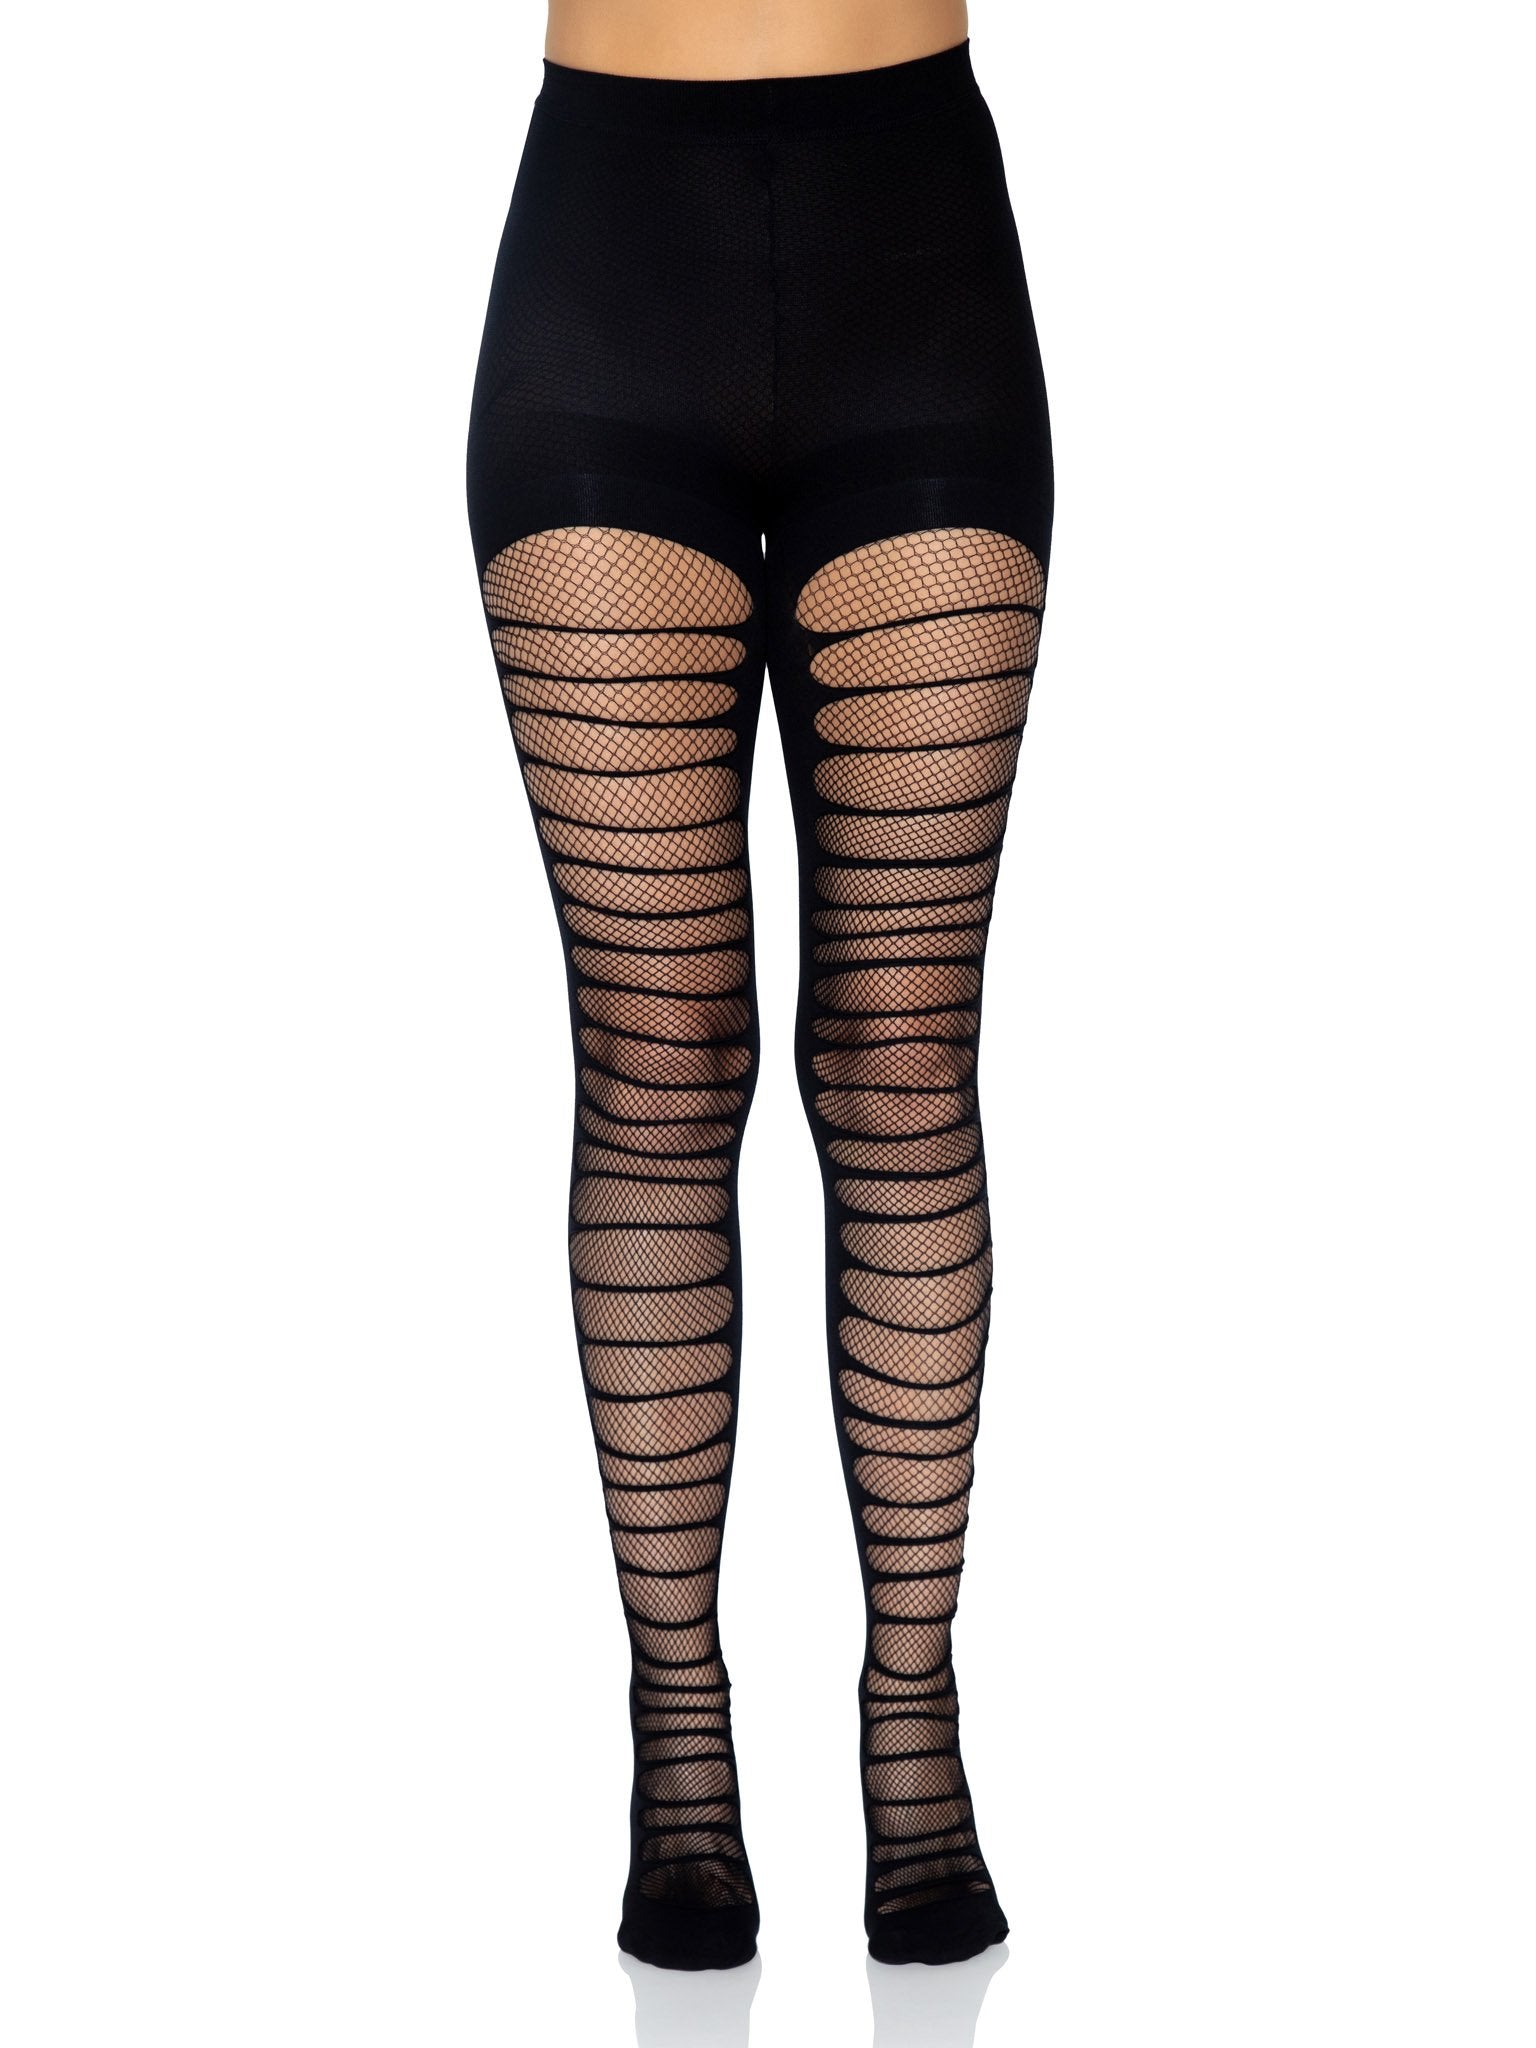 LOYASEAL Ripped Tights, Fishnet Tights, Broken Hole Fishnets, Fishnet  Stockings for women at  Women's Clothing store